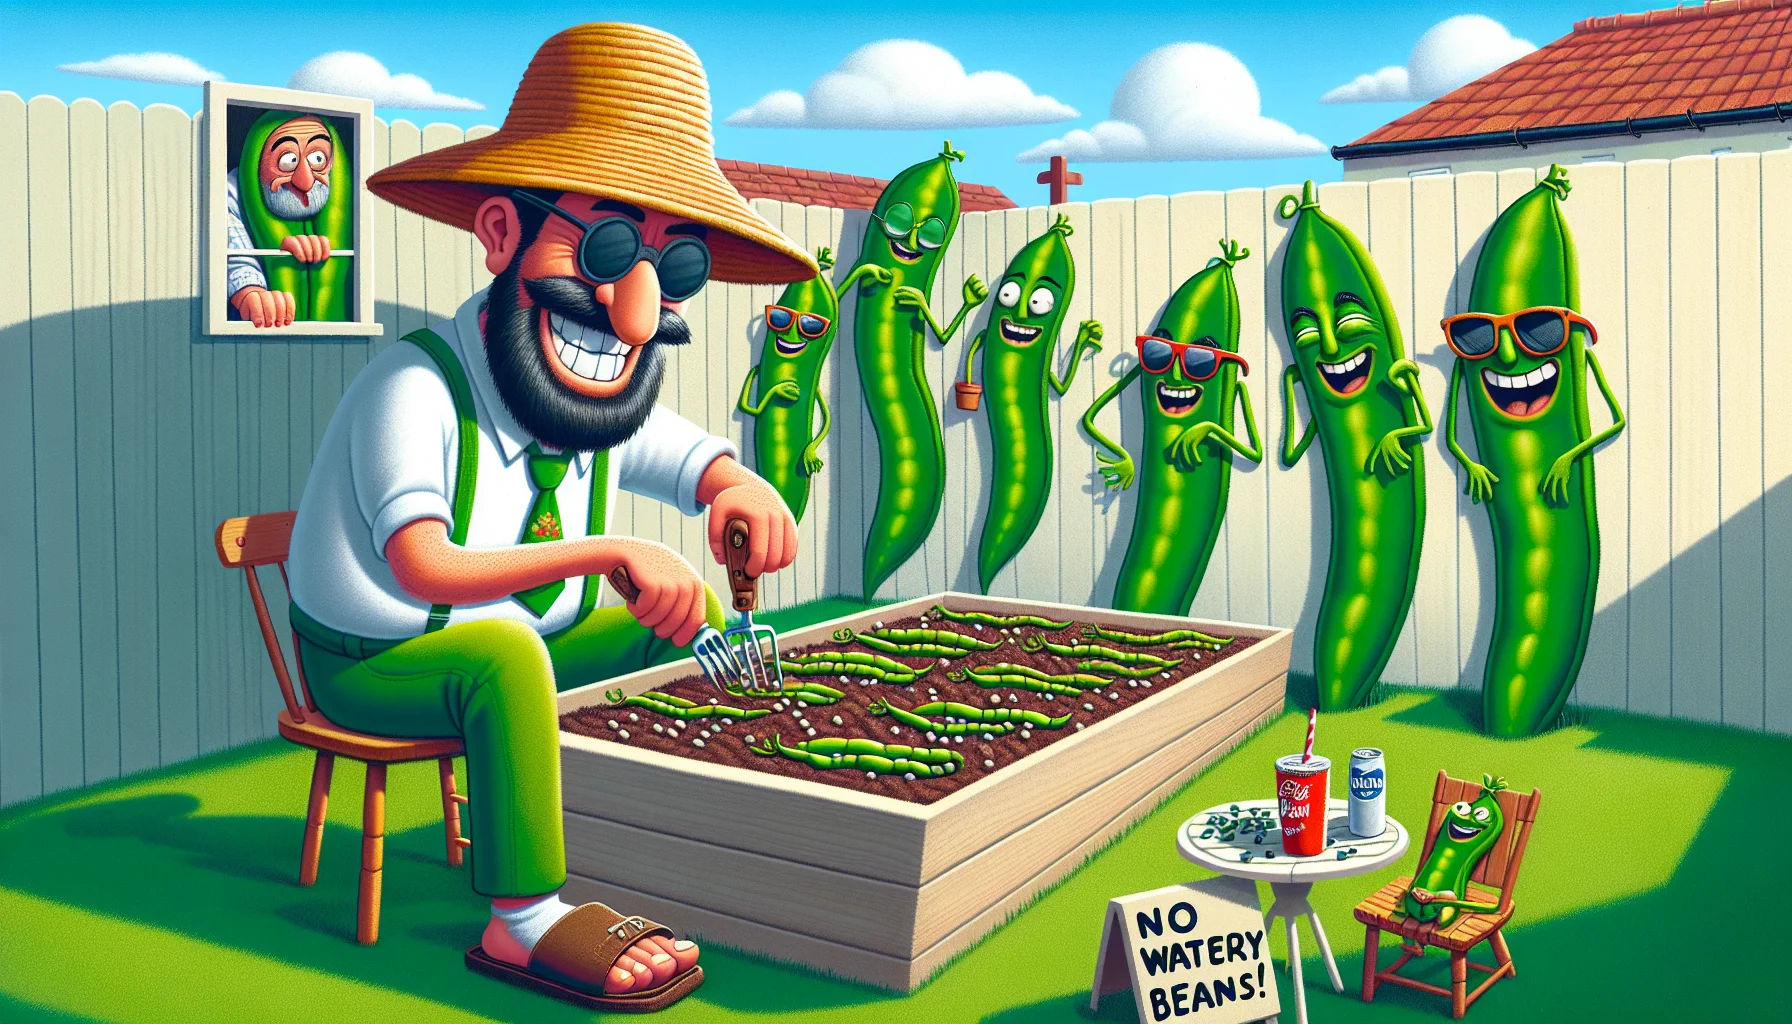 Create a humorous and engaging scene depicting the process of growing green beans, designed to encourage interest in gardening. Picture an oblong backyard garden under a bright sunny day where a jovial, eager gardener, of Middle Eastern descent, decked in a ridiculous oversized sun hat and high-water green slacks, is meticulously planting tiny green bean seeds. Nearby, a white male neighbor, smirking, watches him through the fence, wearing a shirt that says 'the real bean counter'. There are beanstalks wearing sunglasses and flip flops, lounging in mini-chairs, sipping fizzy drinks under a 'No Watery Beans!' sign.